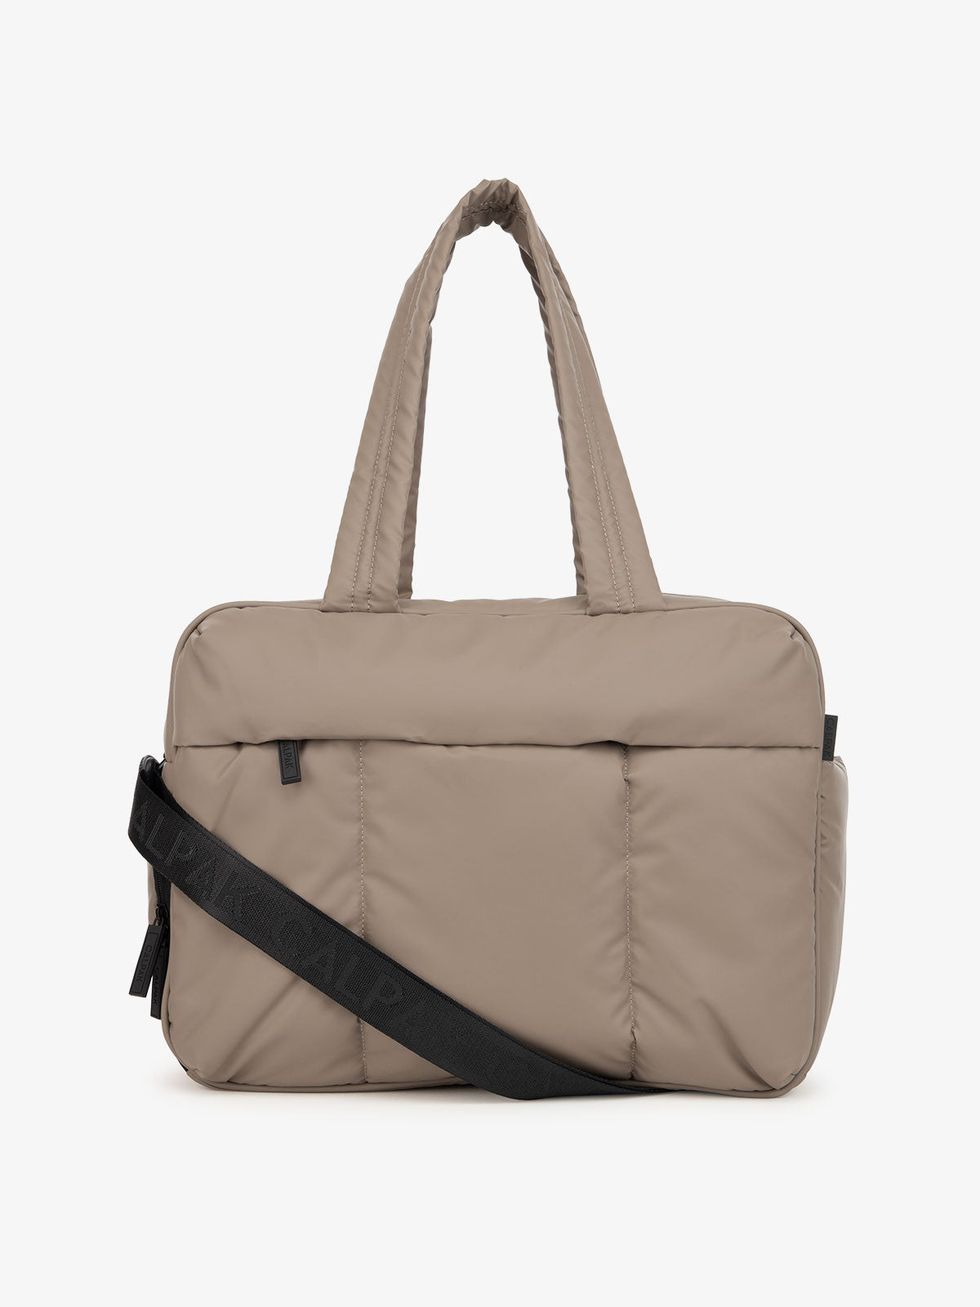 This Is One of the Most Versatile and Stylish Weekend Bags I've Ever Used